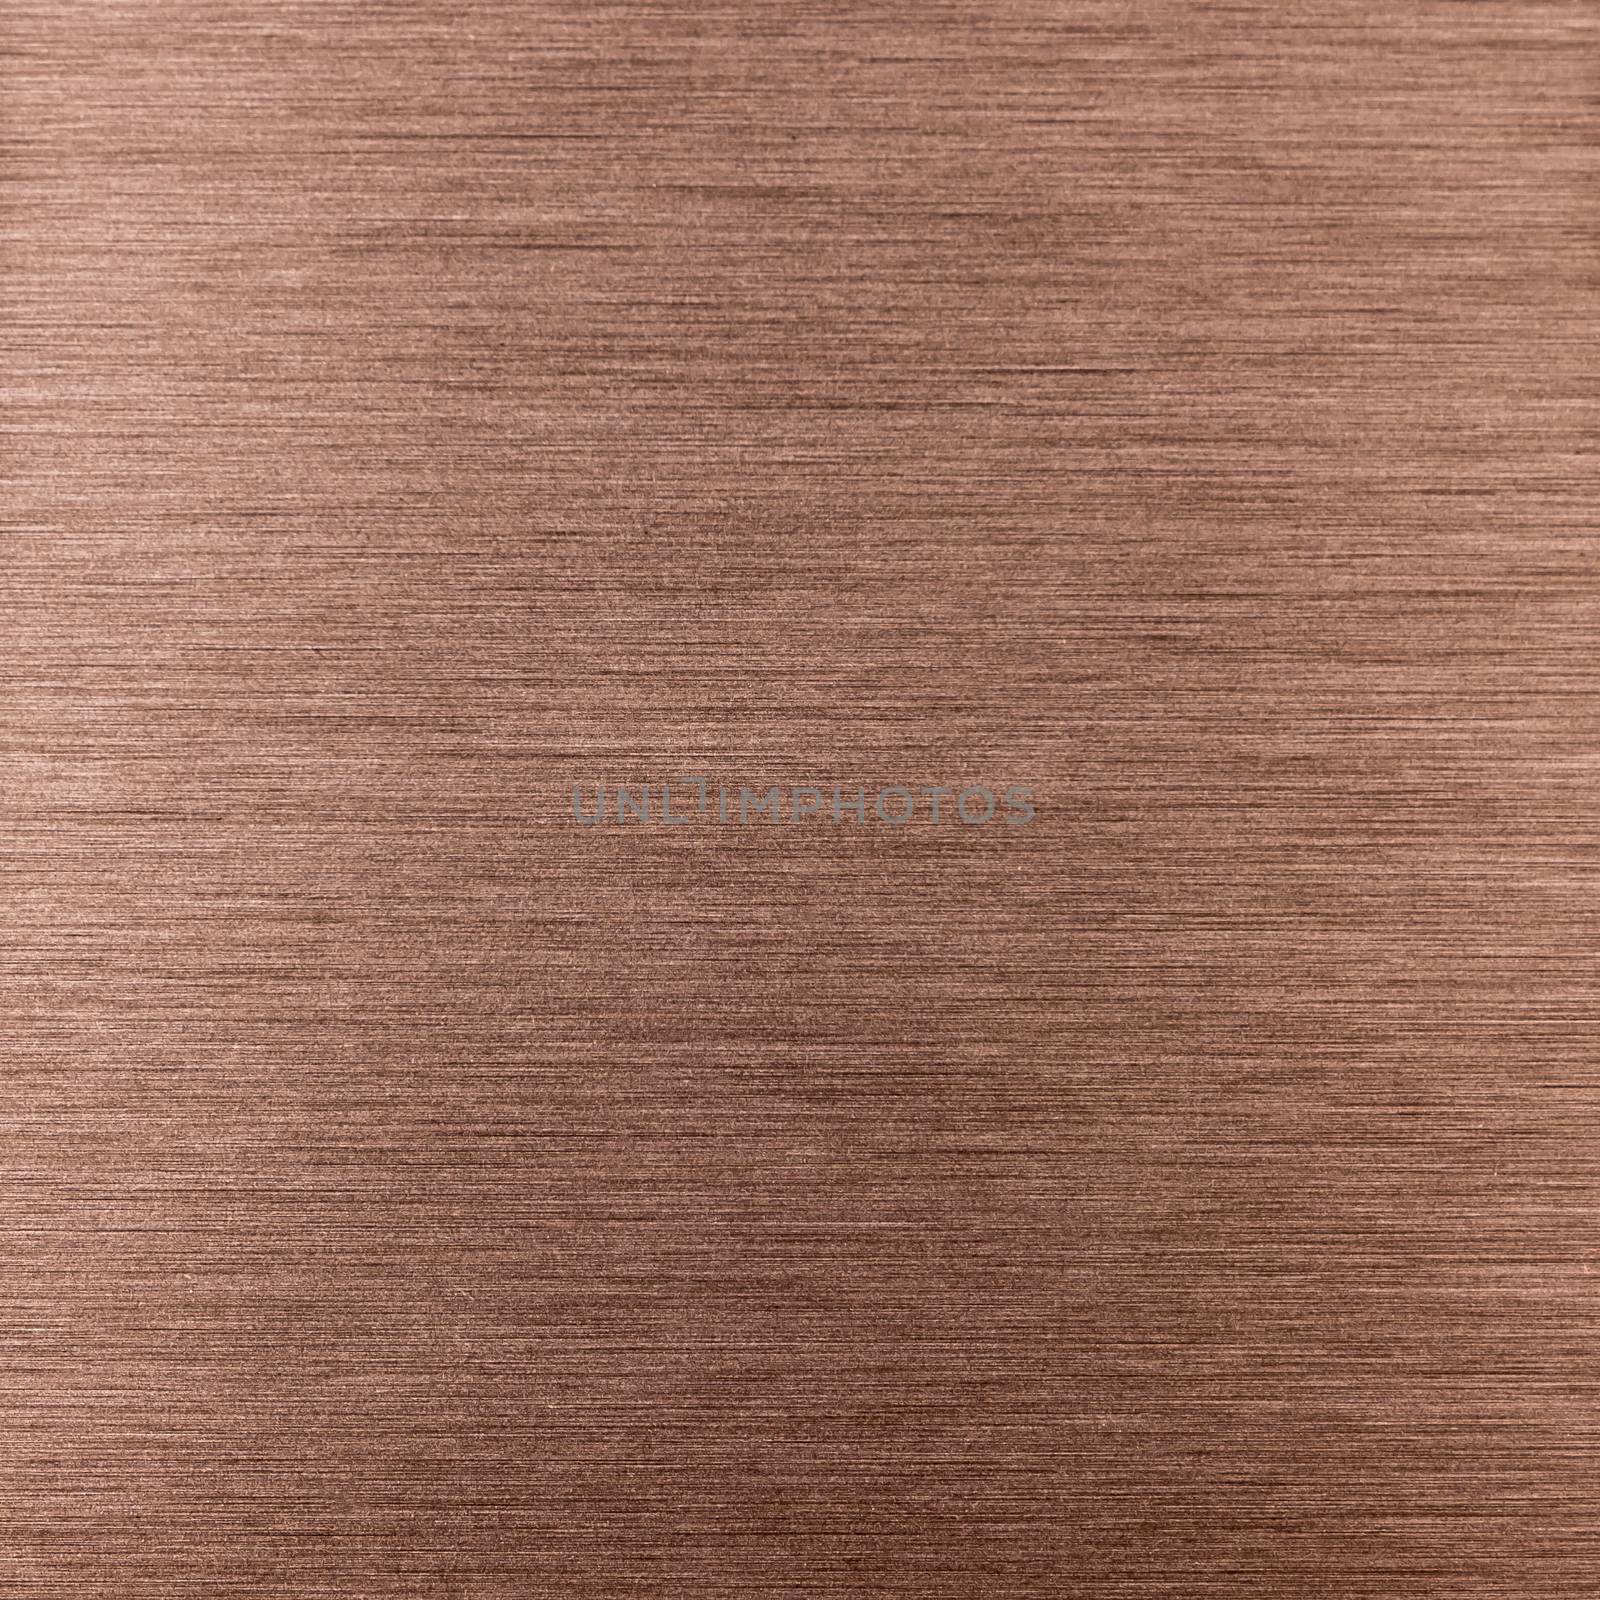 Background texture of a shiny metal sheet with a rough stippled  by AnaMarques